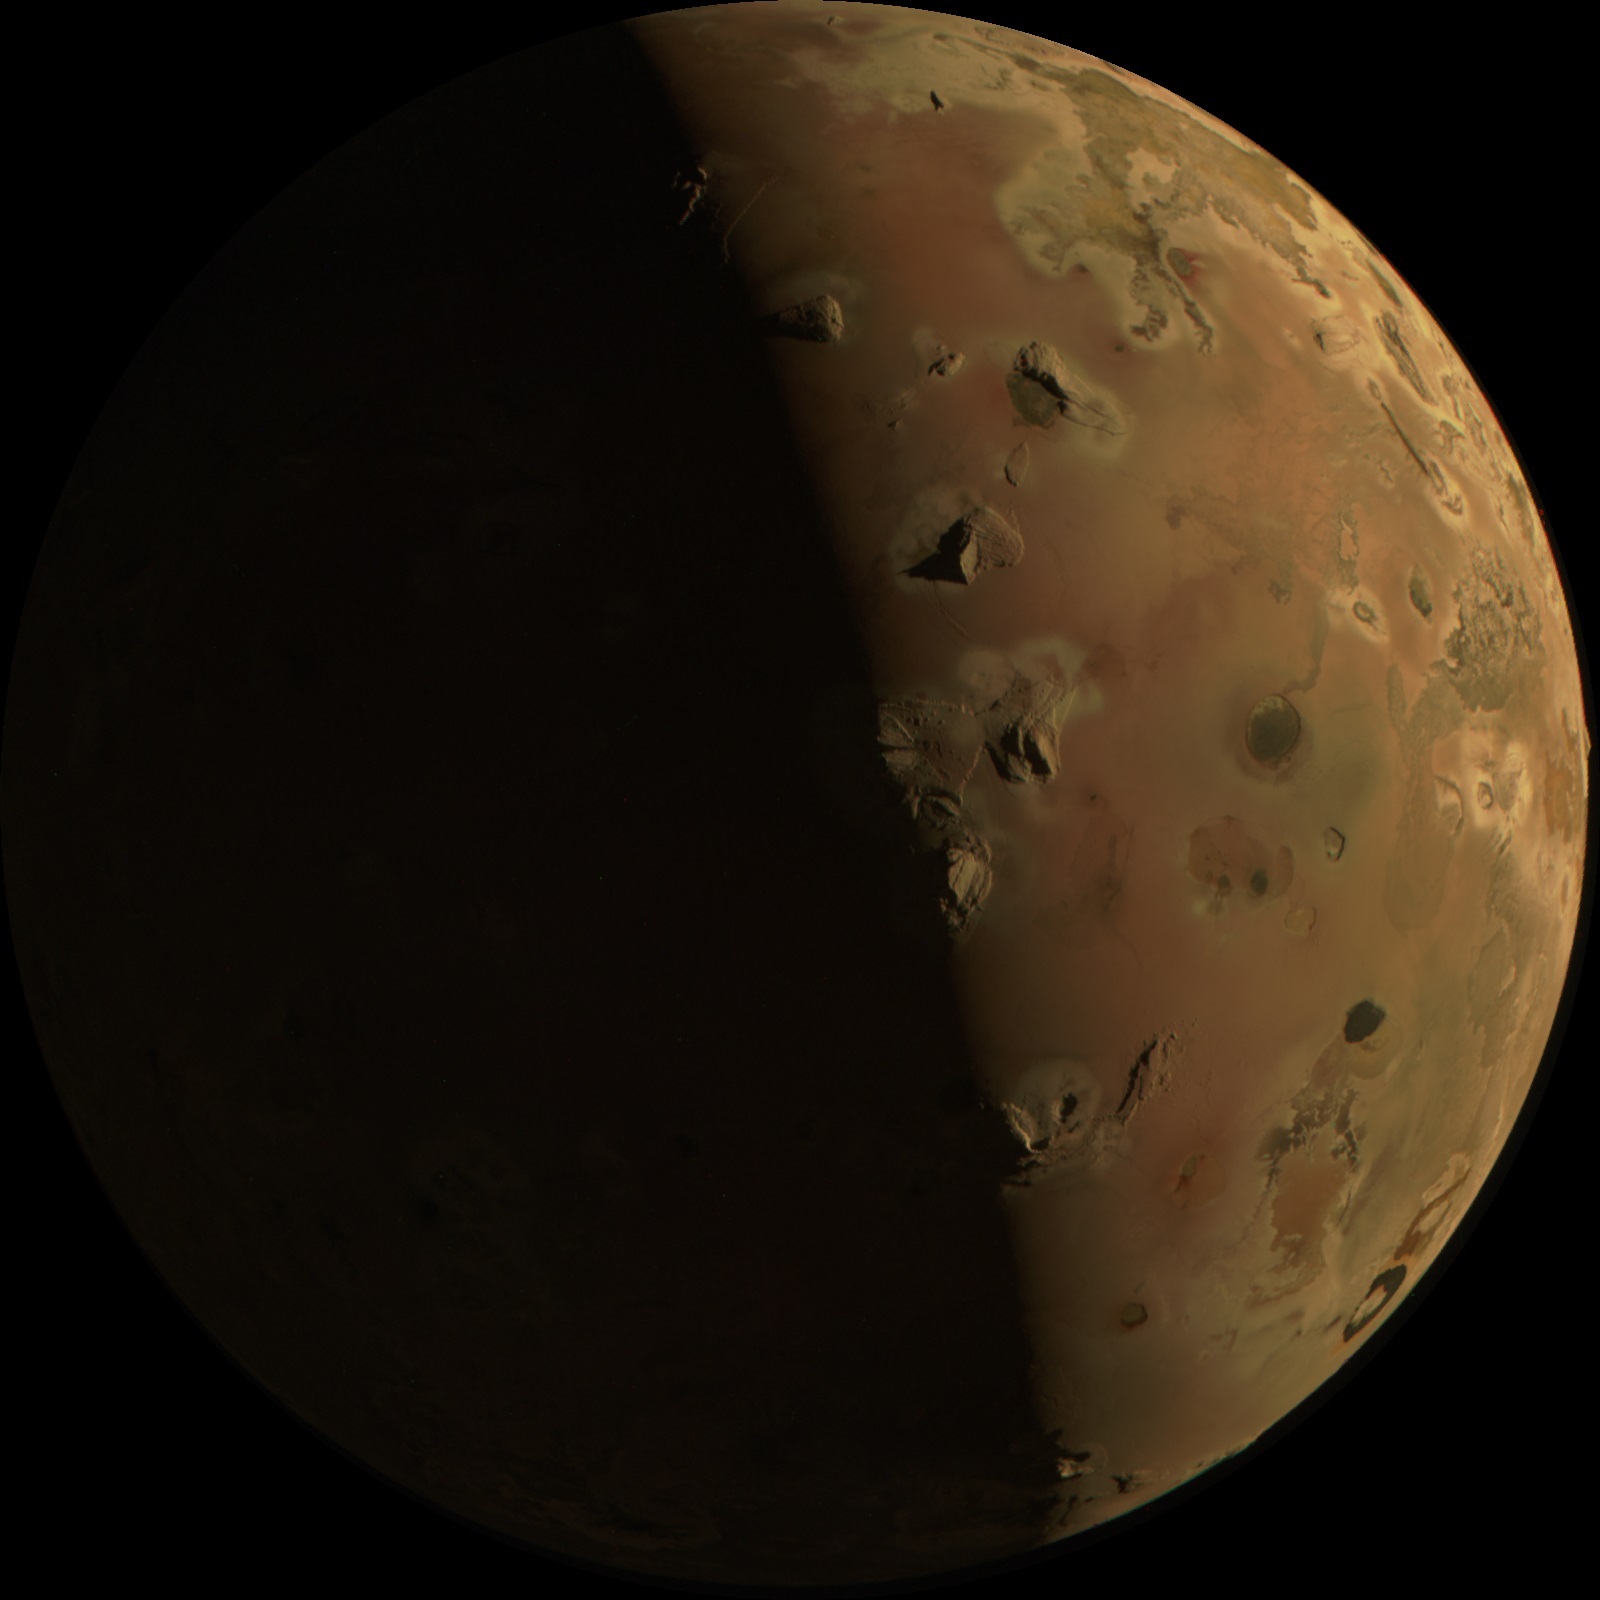 A rust-colored sphere is shown against a black background. The left half is concealed in shadow, with only a very dim outline visible. The right half is fairly well-lighted, with the surface smooth in some areas and in others covered with splotches and peaks of light tan, or spots and dimples of dark orange or dark grayish brown.